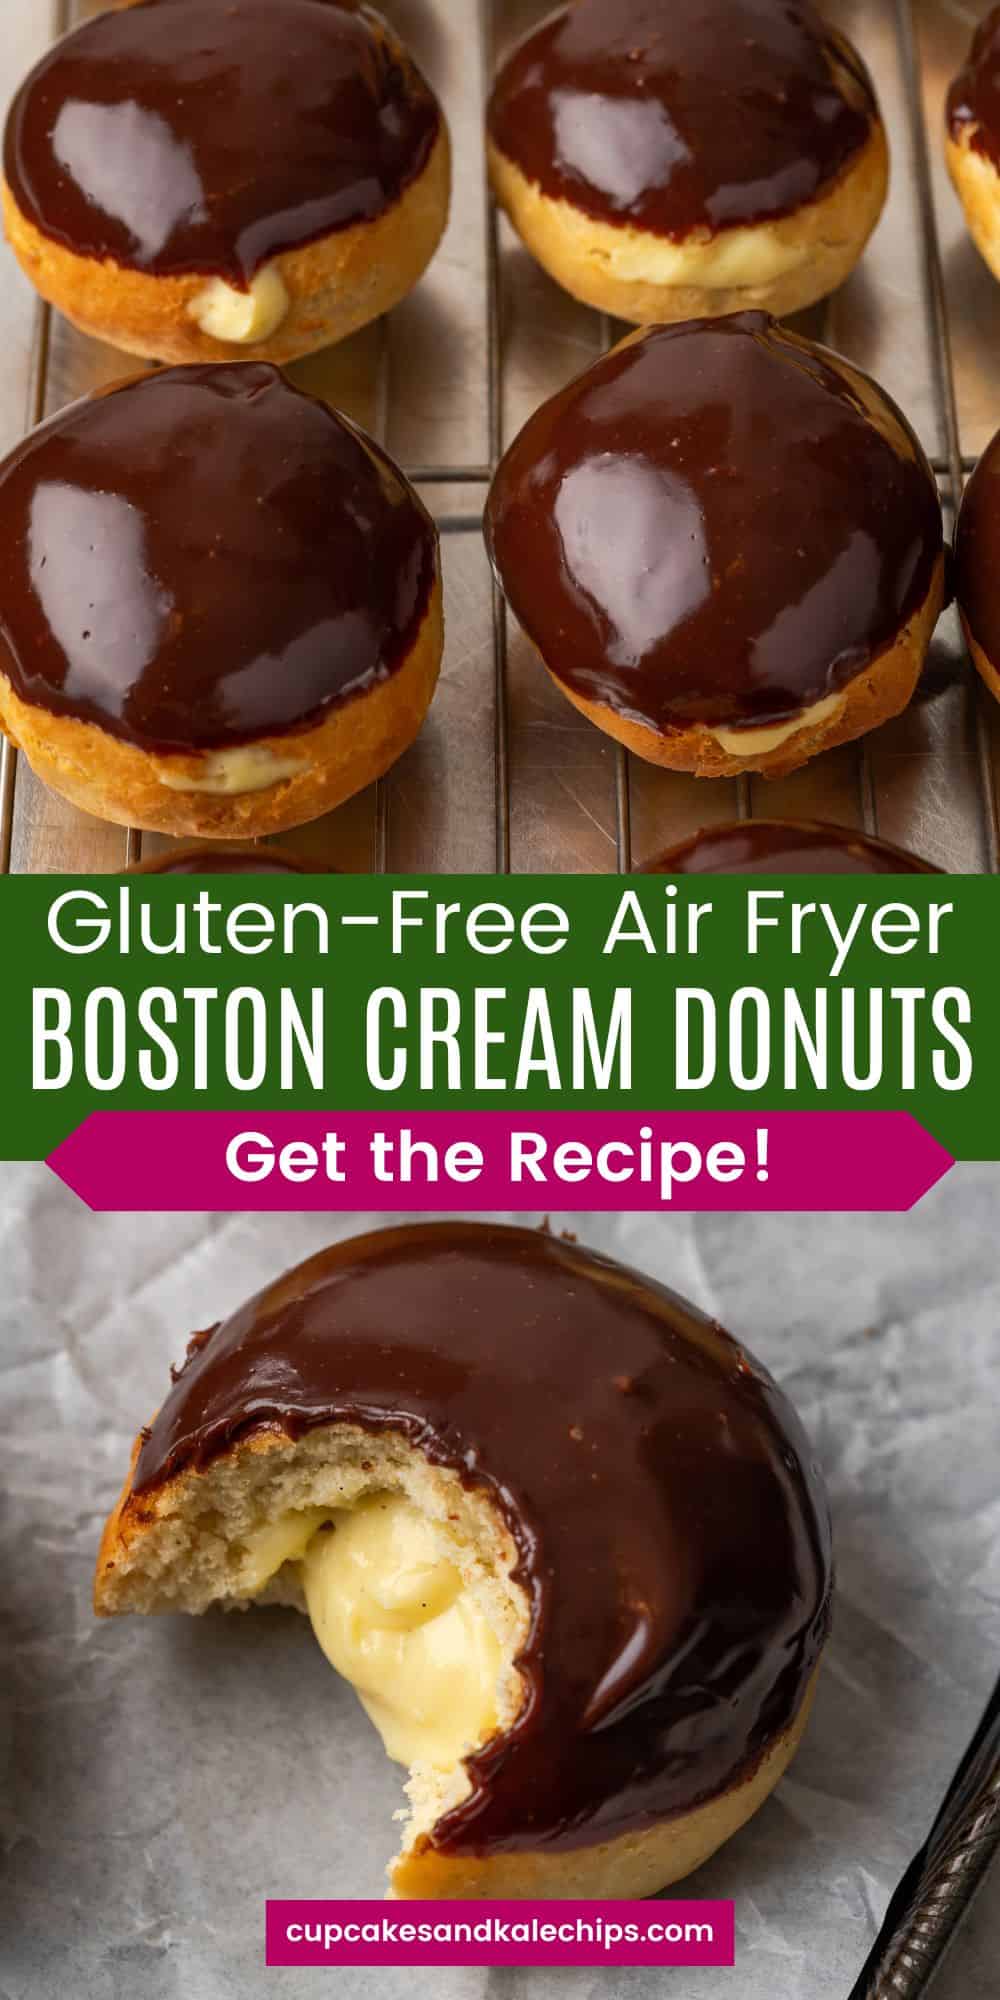 Gluten-Free Boston Cream Donuts | Cupcakes and Kale Chips